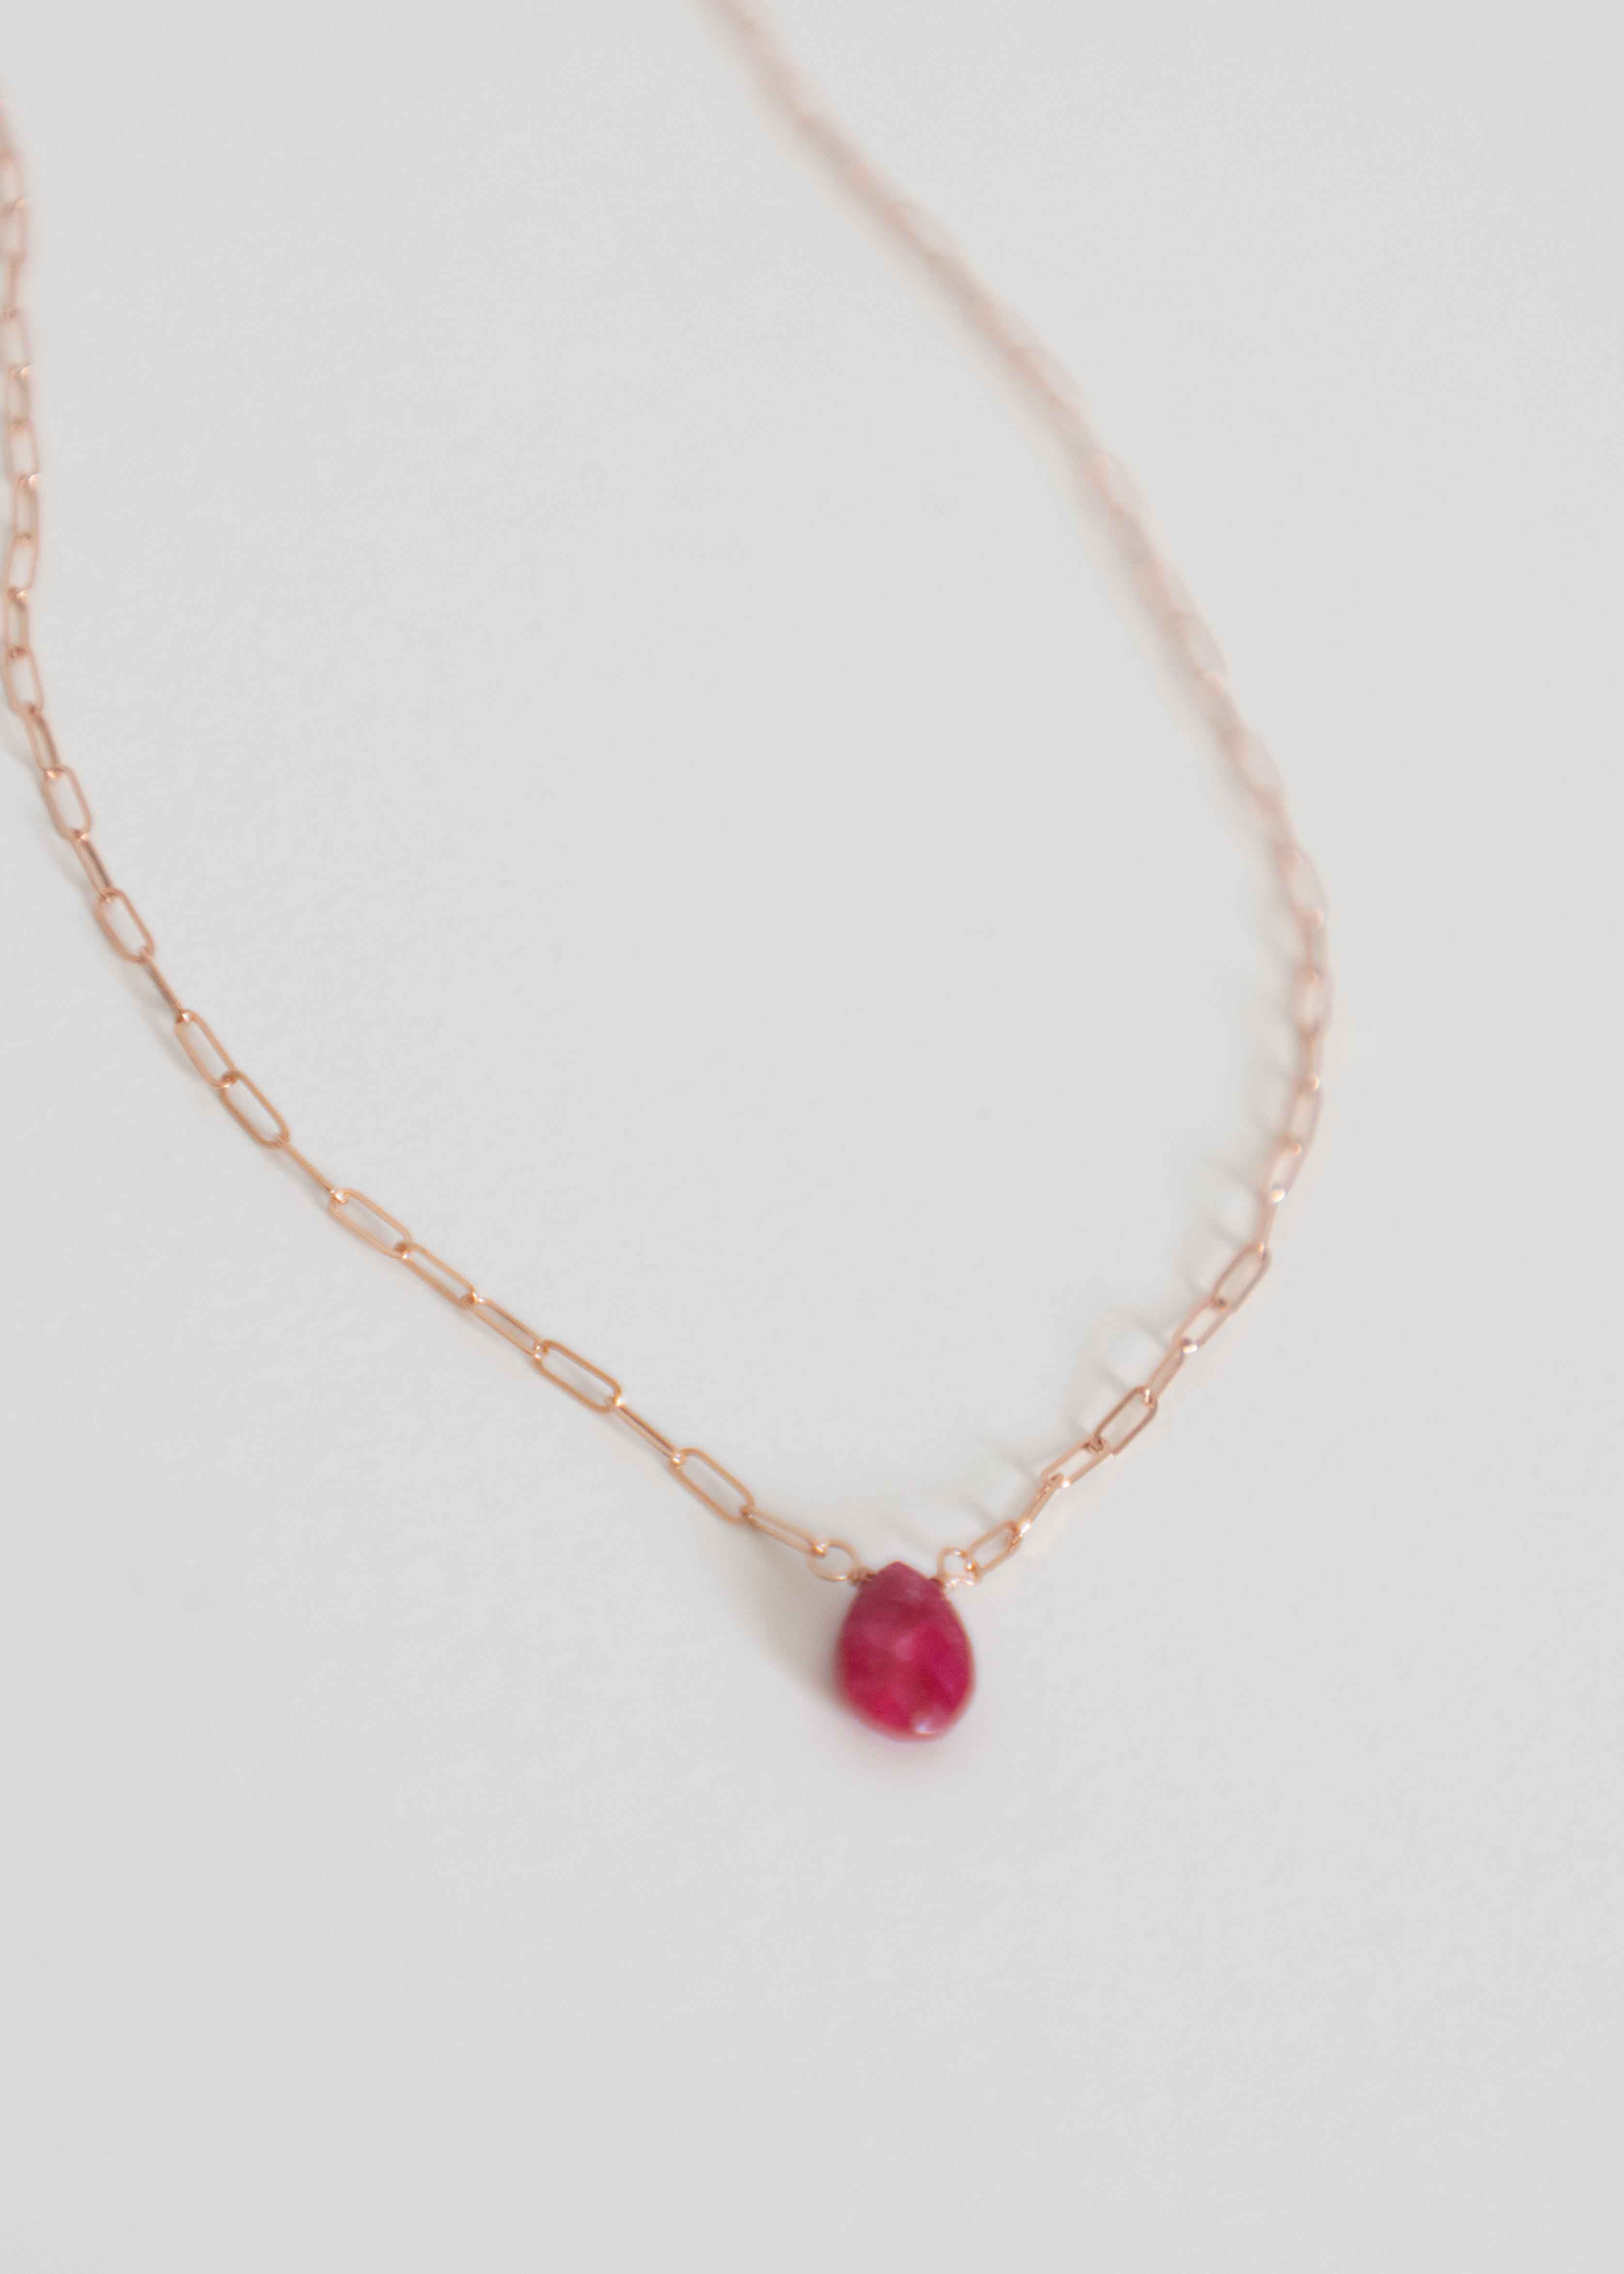 Buy Dainty Ruby Necklace, Silver Ruby Necklace, Simple Ruby Silver Necklace,  Ruby Dainty Necklace, July Birthstone Necklace, July Necklace Online in  India - Etsy